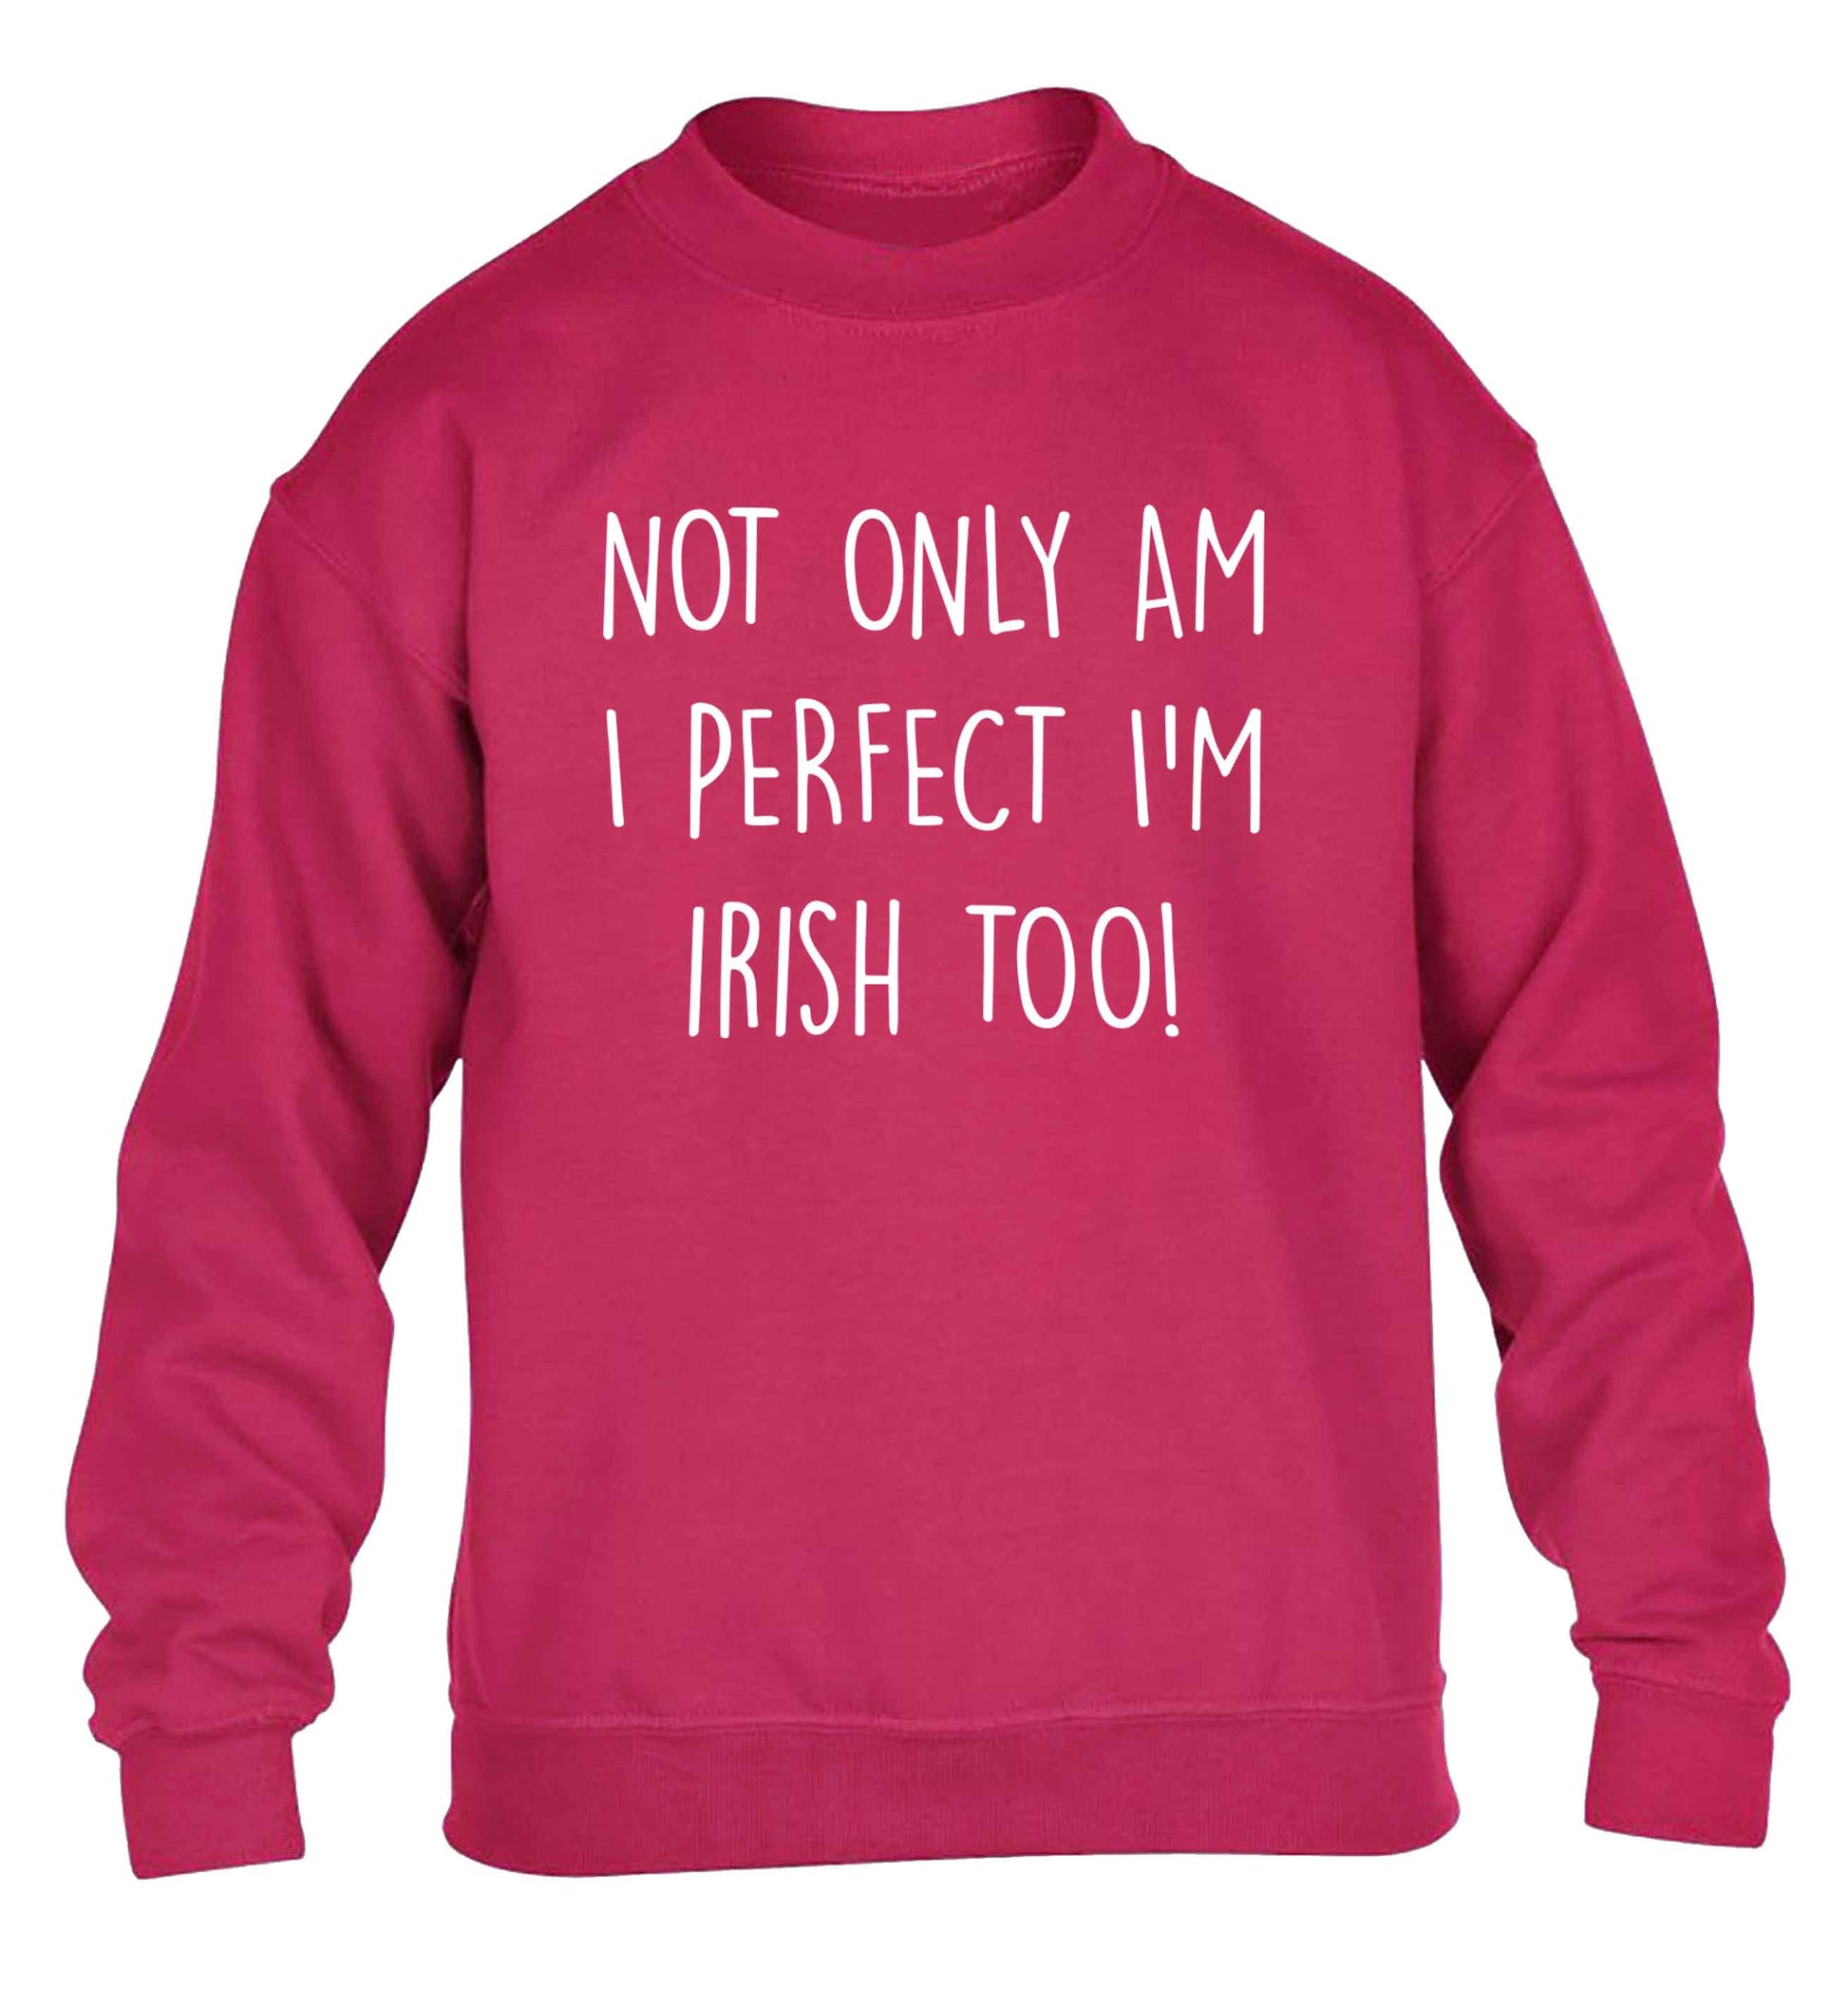 Not only am I perfect I'm Irish too! children's pink sweater 12-13 Years